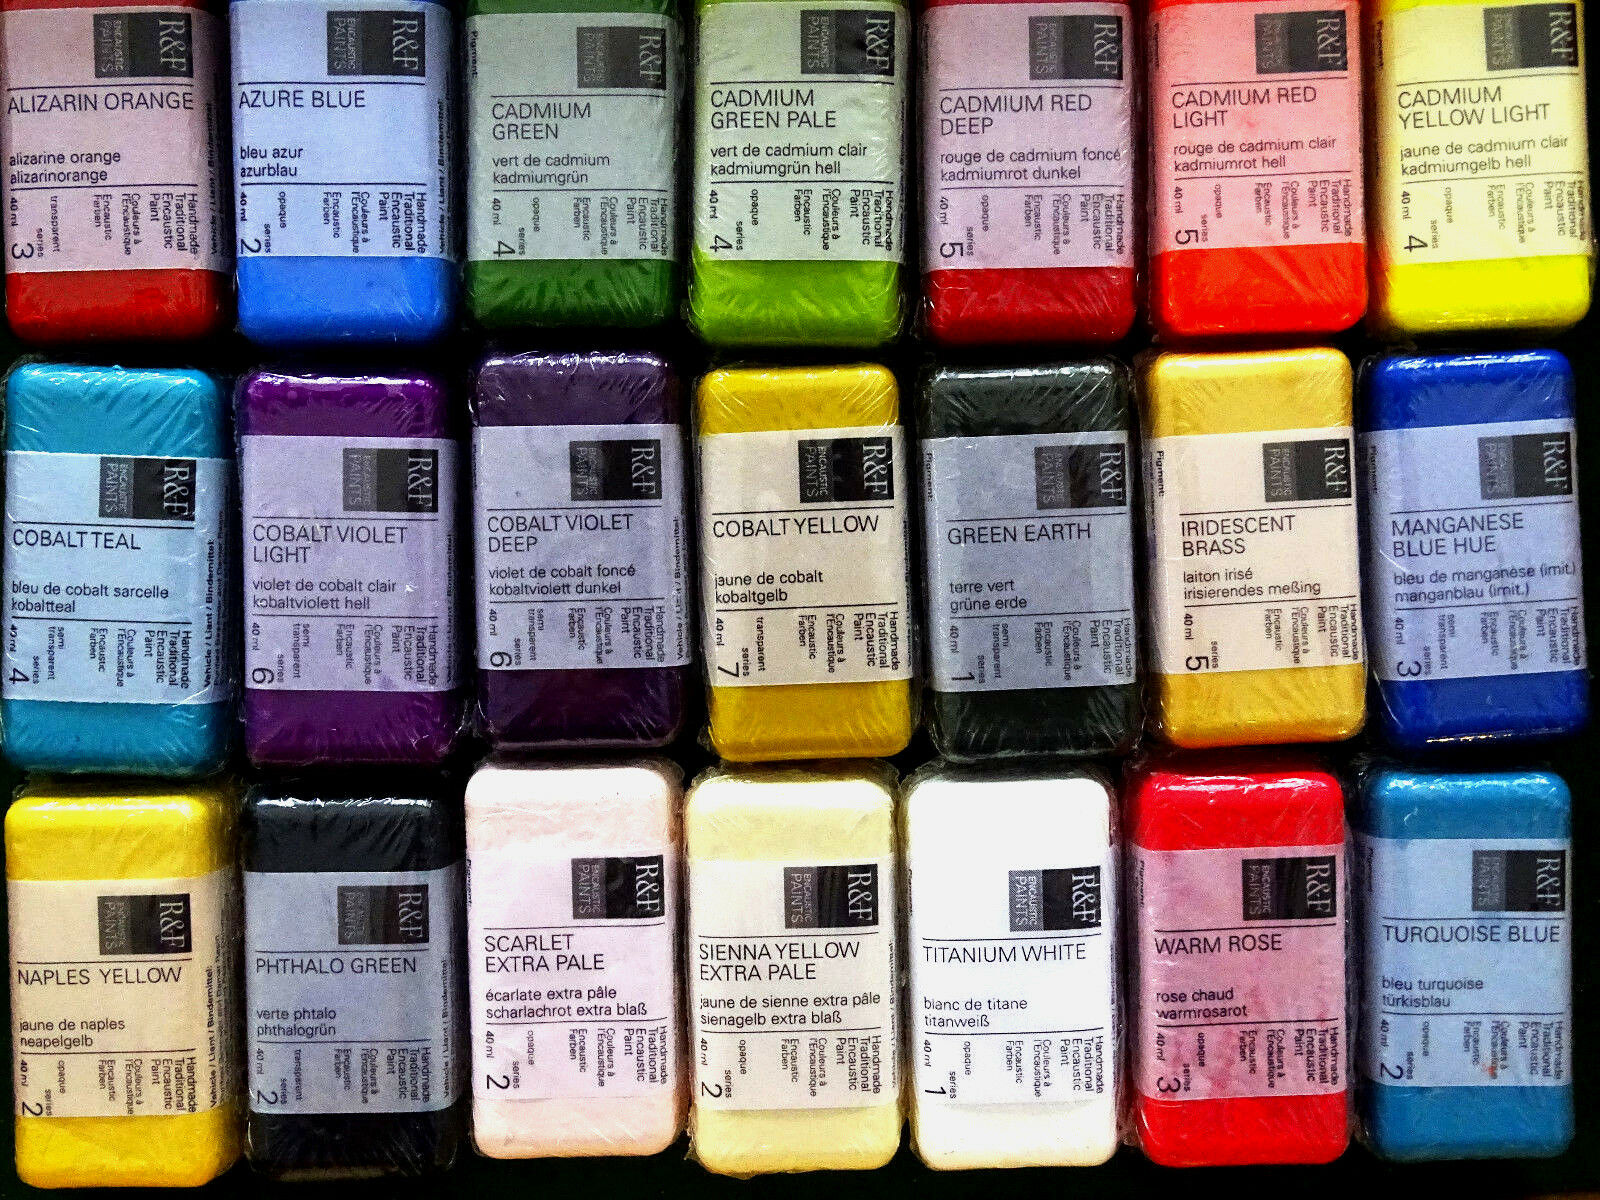 R&f Encaustic Brushes And Paint Blocks (40ml), 90 Colors, Flat Rate Shipping $4